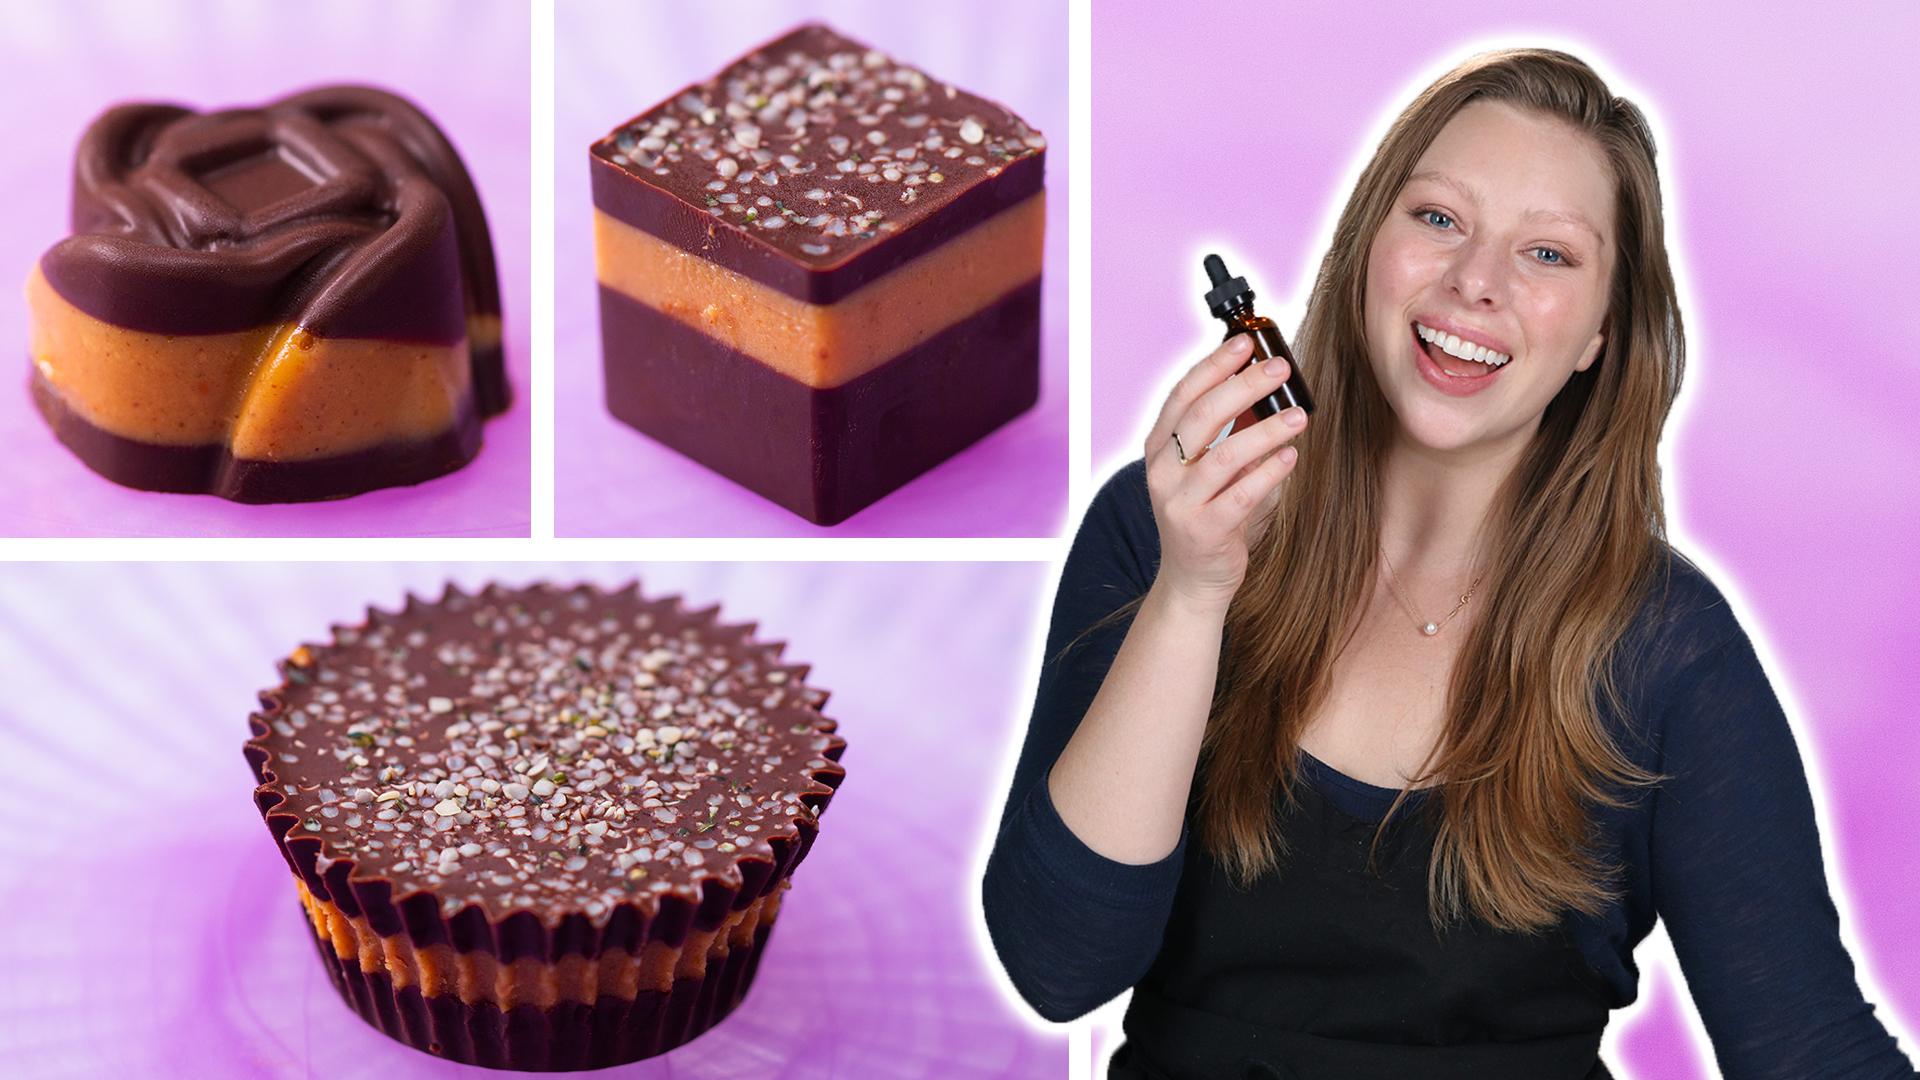 5-ingredient Chocolate Peanut Butter Cups Recipe by Tasty